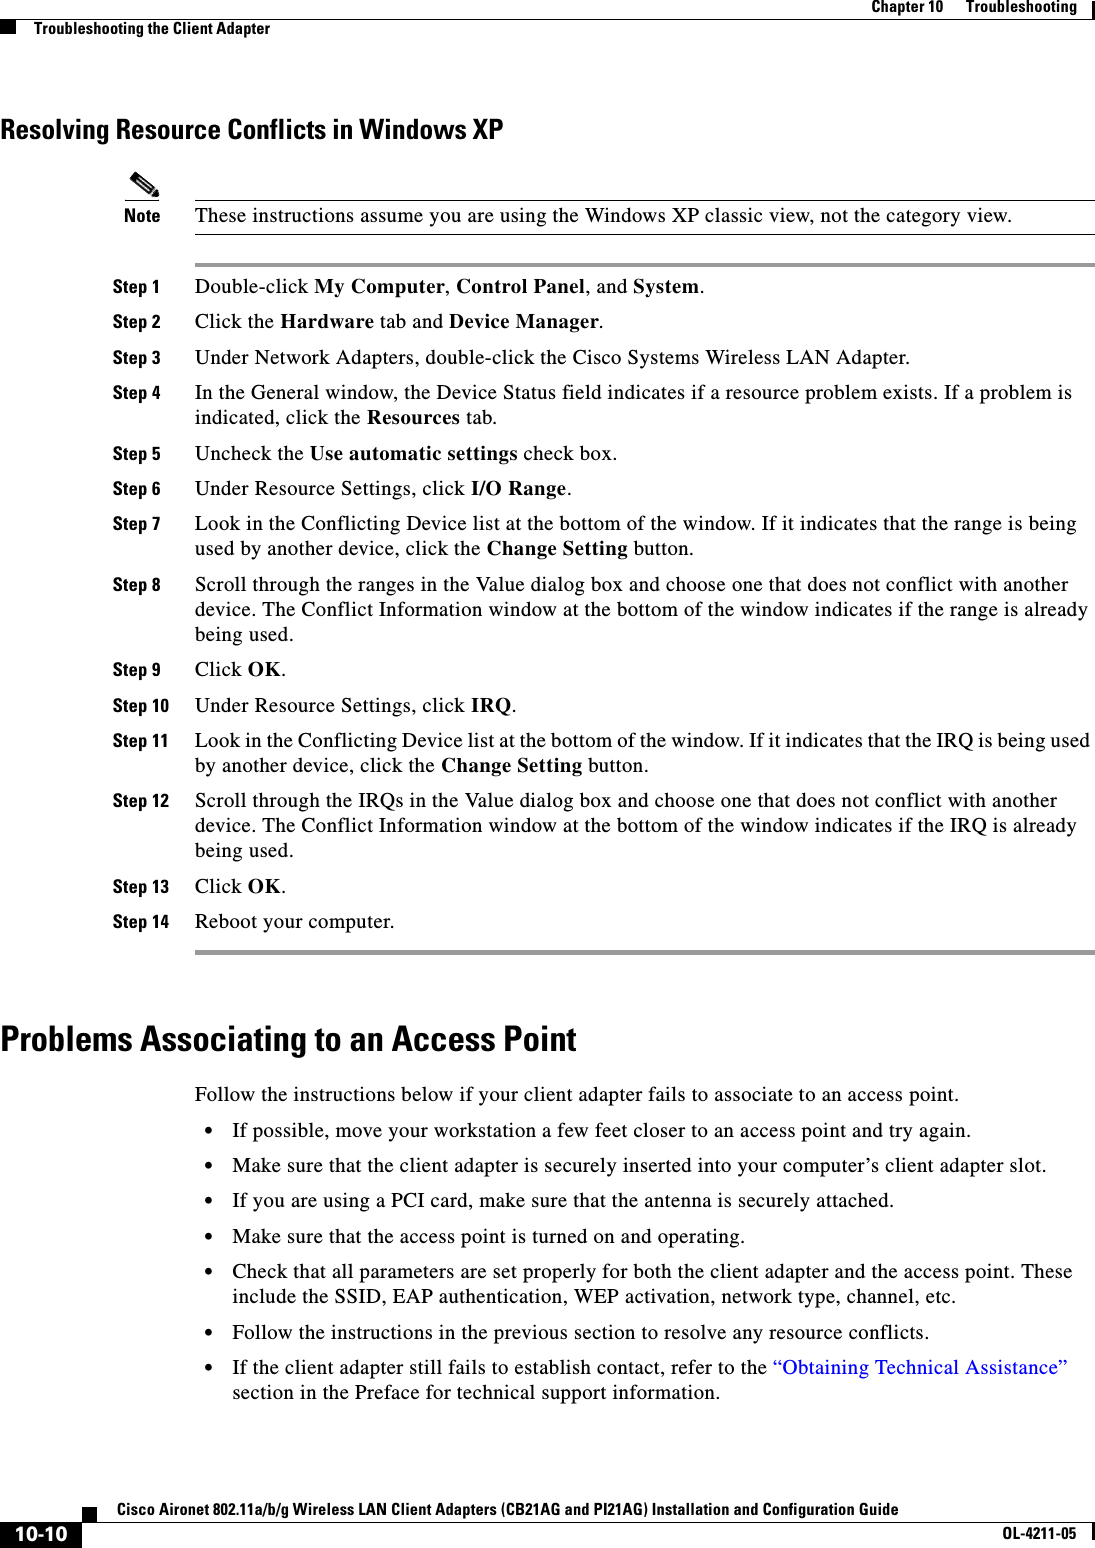 10-10Cisco Aironet 802.11a/b/g Wireless LAN Client Adapters (CB21AG and PI21AG) Installation and Configuration GuideOL-4211-05Chapter 10      TroubleshootingTroubleshooting the Client AdapterResolving Resource Conflicts in Windows XPNote These instructions assume you are using the Windows XP classic view, not the category view.Step 1 Double-click My Computer,Control Panel, and System.Step 2 Click the Hardware tab and Device Manager.Step 3 Under Network Adapters, double-click the Cisco Systems Wireless LAN Adapter.Step 4 In the General window, the Device Status field indicates if a resource problem exists. If a problem is indicated, click the Resources tab.Step 5 Uncheck the Use automatic settings check box.Step 6 Under Resource Settings, click I/O Range.Step 7 Look in the Conflicting Device list at the bottom of the window. If it indicates that the range is being used by another device, click the Change Setting button.Step 8 Scroll through the ranges in the Value dialog box and choose one that does not conflict with another device. The Conflict Information window at the bottom of the window indicates if the range is already being used.Step 9 Click OK.Step 10 Under Resource Settings, click IRQ.Step 11 Look in the Conflicting Device list at the bottom of the window. If it indicates that the IRQ is being used by another device, click the Change Setting button.Step 12 Scroll through the IRQs in the Value dialog box and choose one that does not conflict with another device. The Conflict Information window at the bottom of the window indicates if the IRQ is already being used.Step 13 Click OK.Step 14 Reboot your computer.Problems Associating to an Access PointFollow the instructions below if your client adapter fails to associate to an access point.•If possible, move your workstation a few feet closer to an access point and try again.•Make sure that the client adapter is securely inserted into your computer’s client adapter slot.•If you are using a PCI card, make sure that the antenna is securely attached.•Make sure that the access point is turned on and operating.•Check that all parameters are set properly for both the client adapter and the access point. These include the SSID, EAP authentication, WEP activation, network type, channel, etc.•Follow the instructions in the previous section to resolve any resource conflicts.•If the client adapter still fails to establish contact, refer to the “Obtaining Technical Assistance”section in the Preface for technical support information.